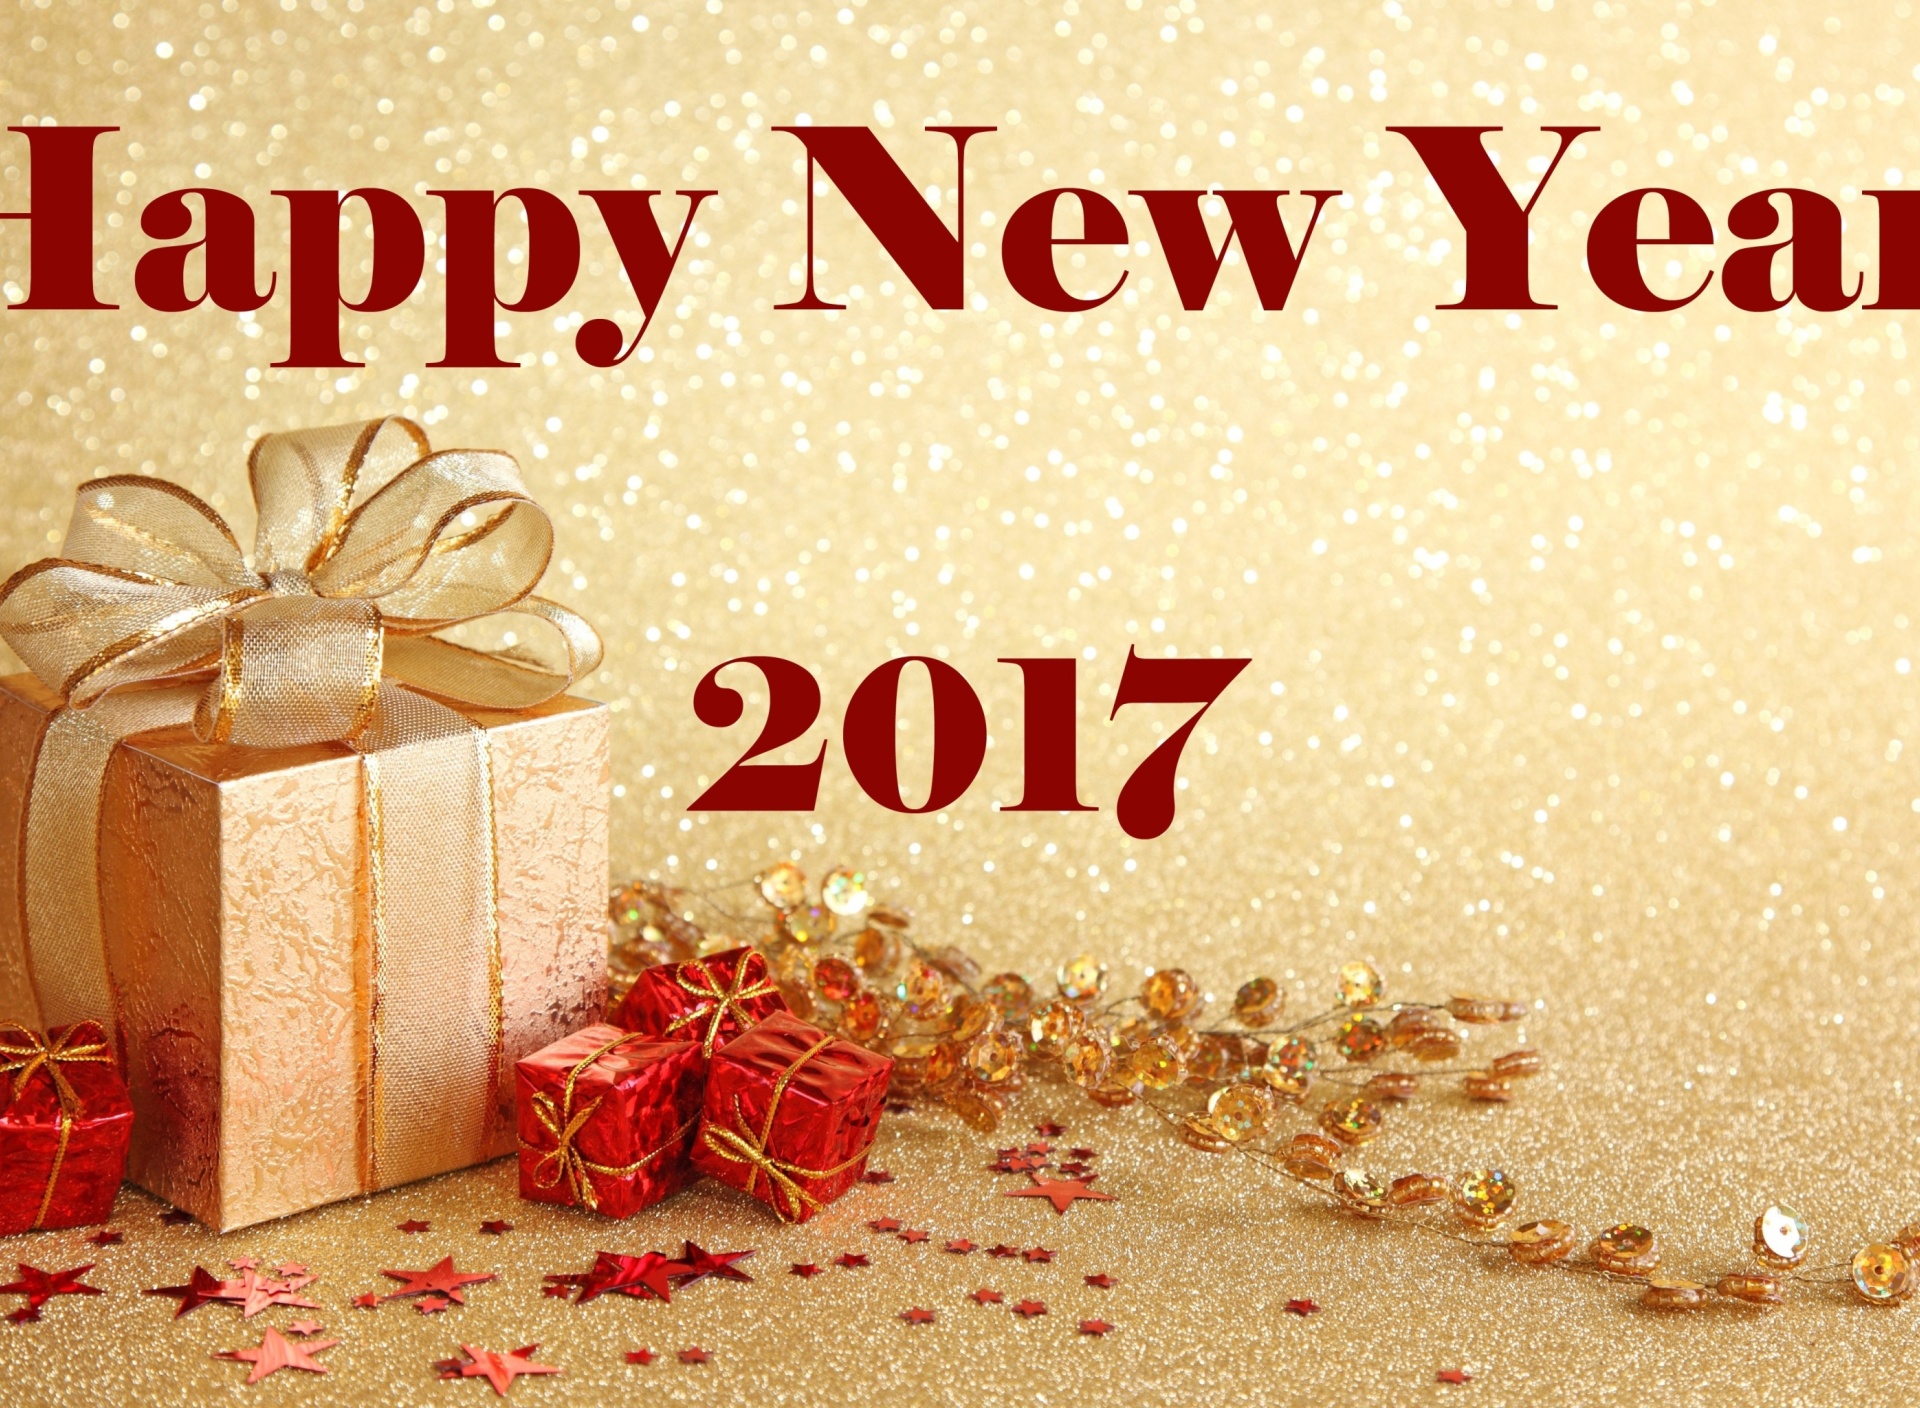 Happy New Year 2017 with Gifts wallpaper 1920x1408